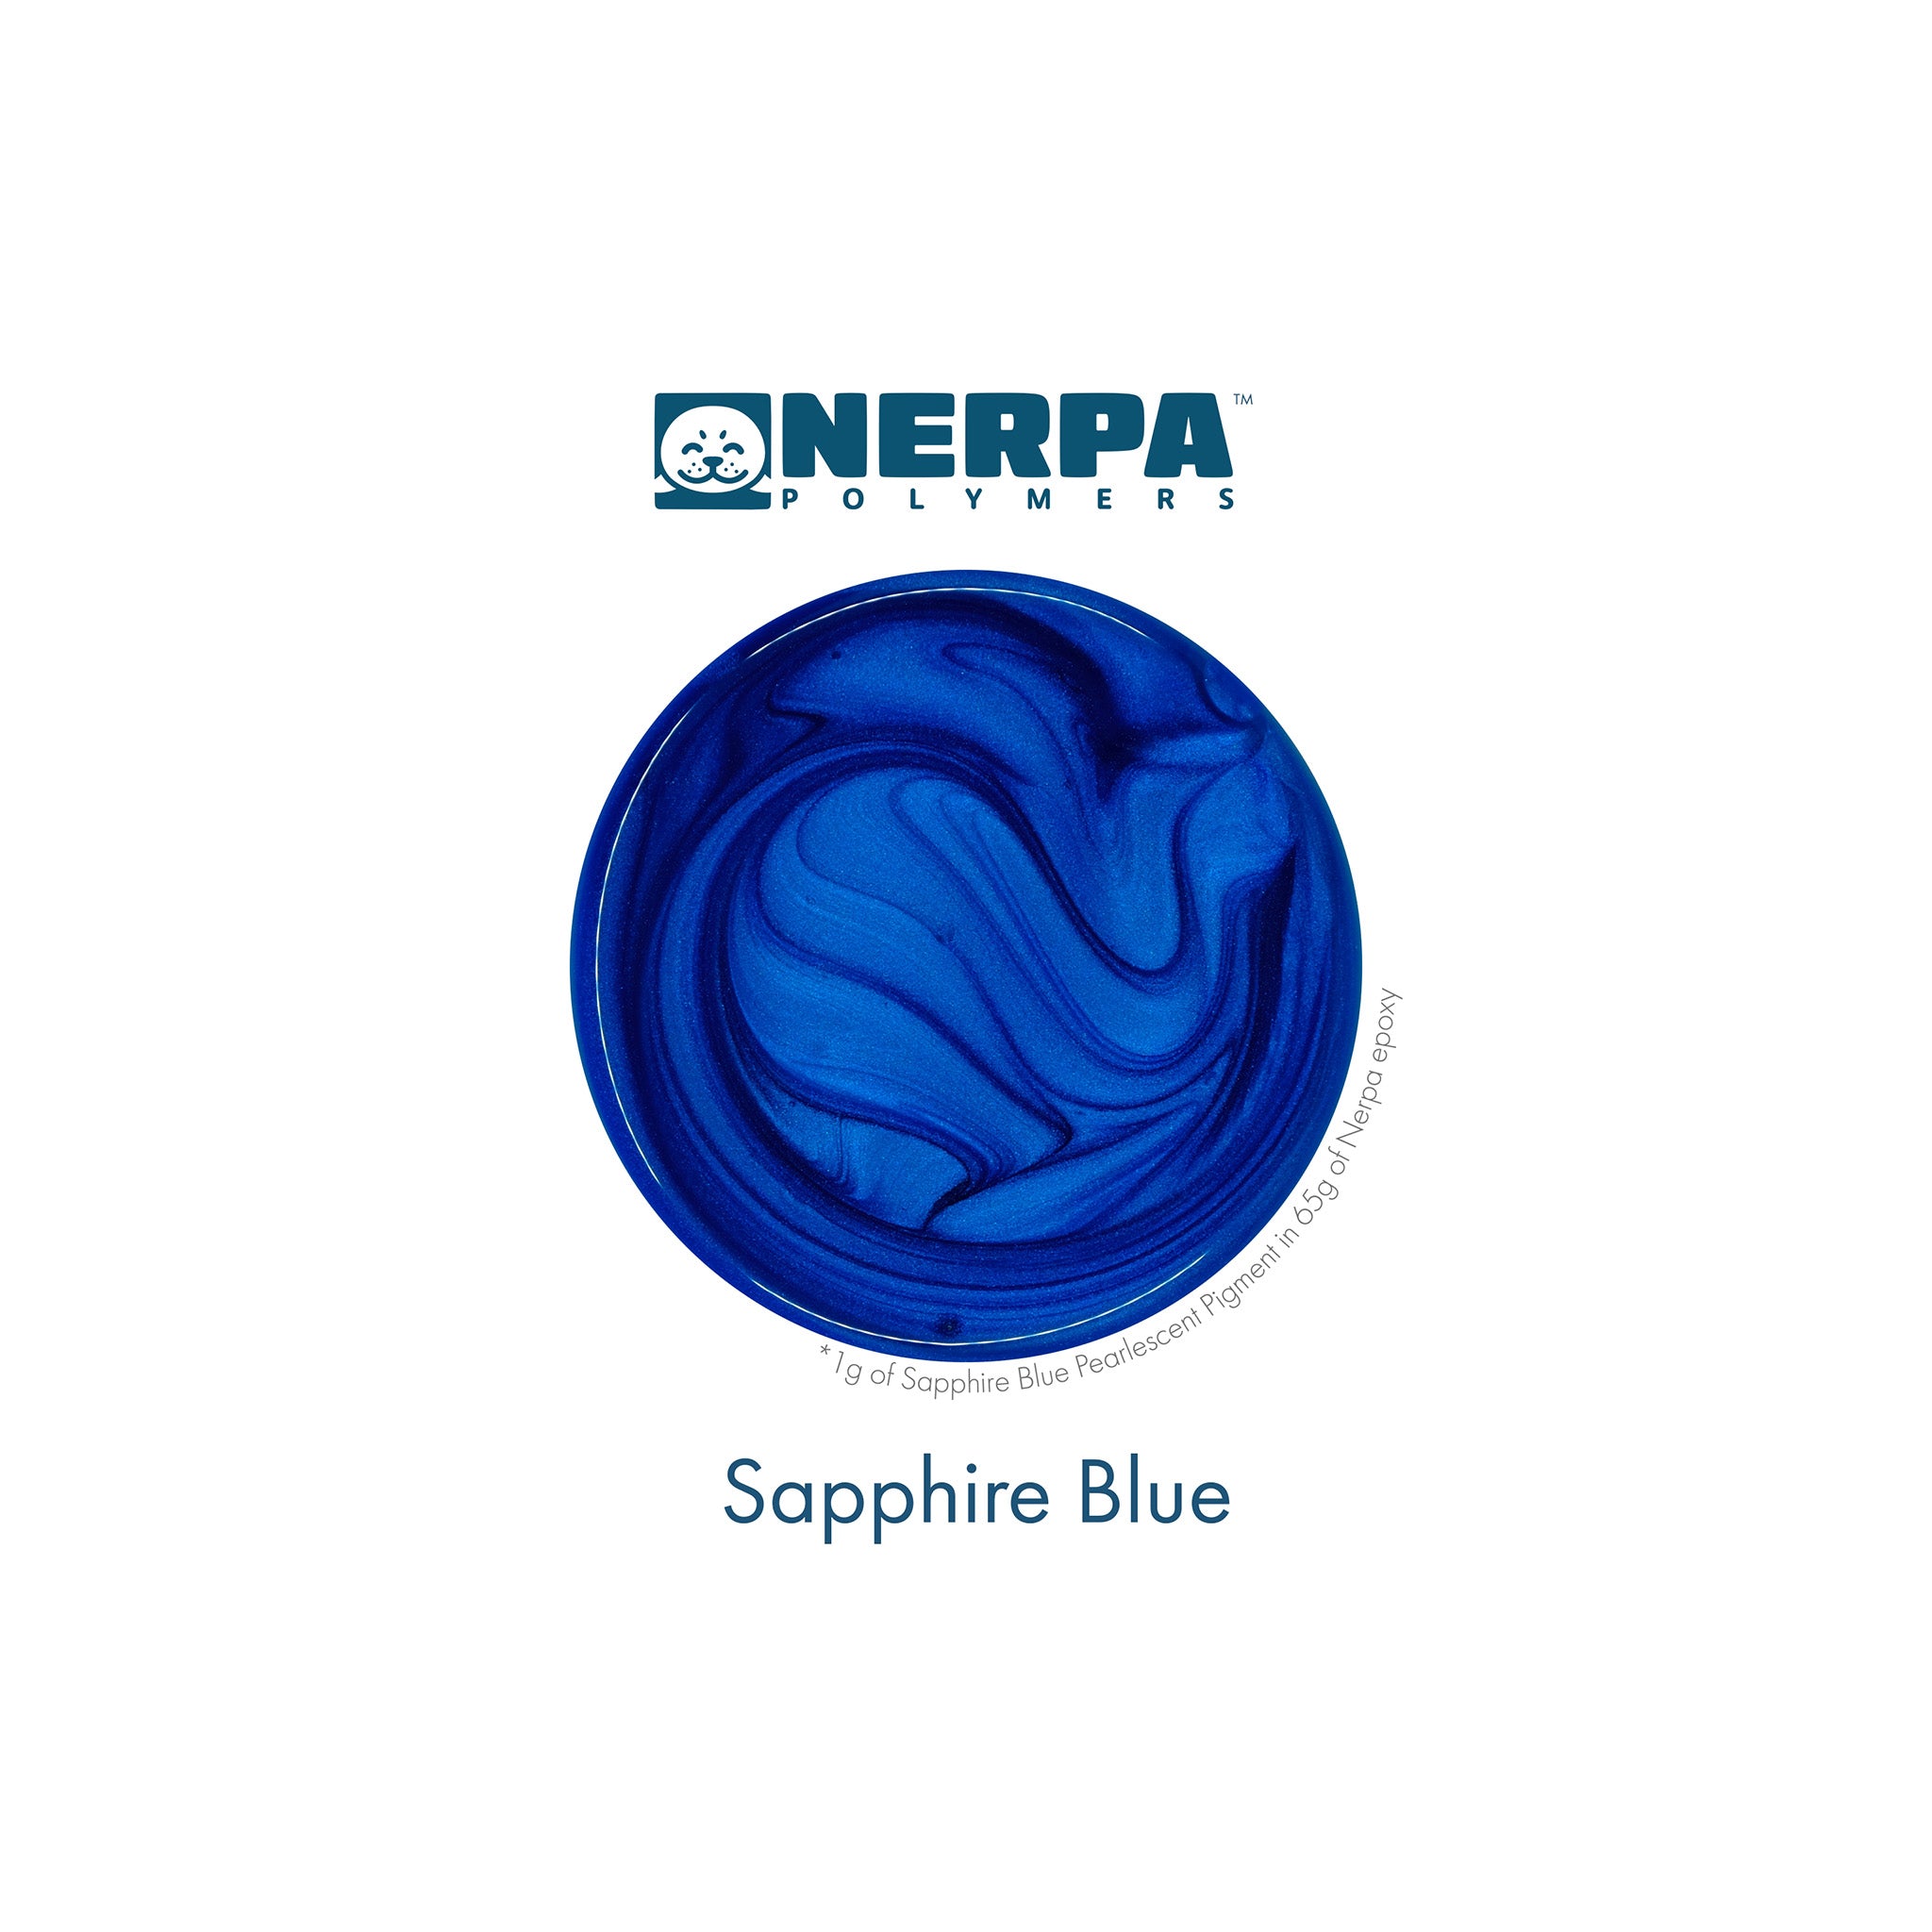 Nerpa Pearlescent Colour Pigments